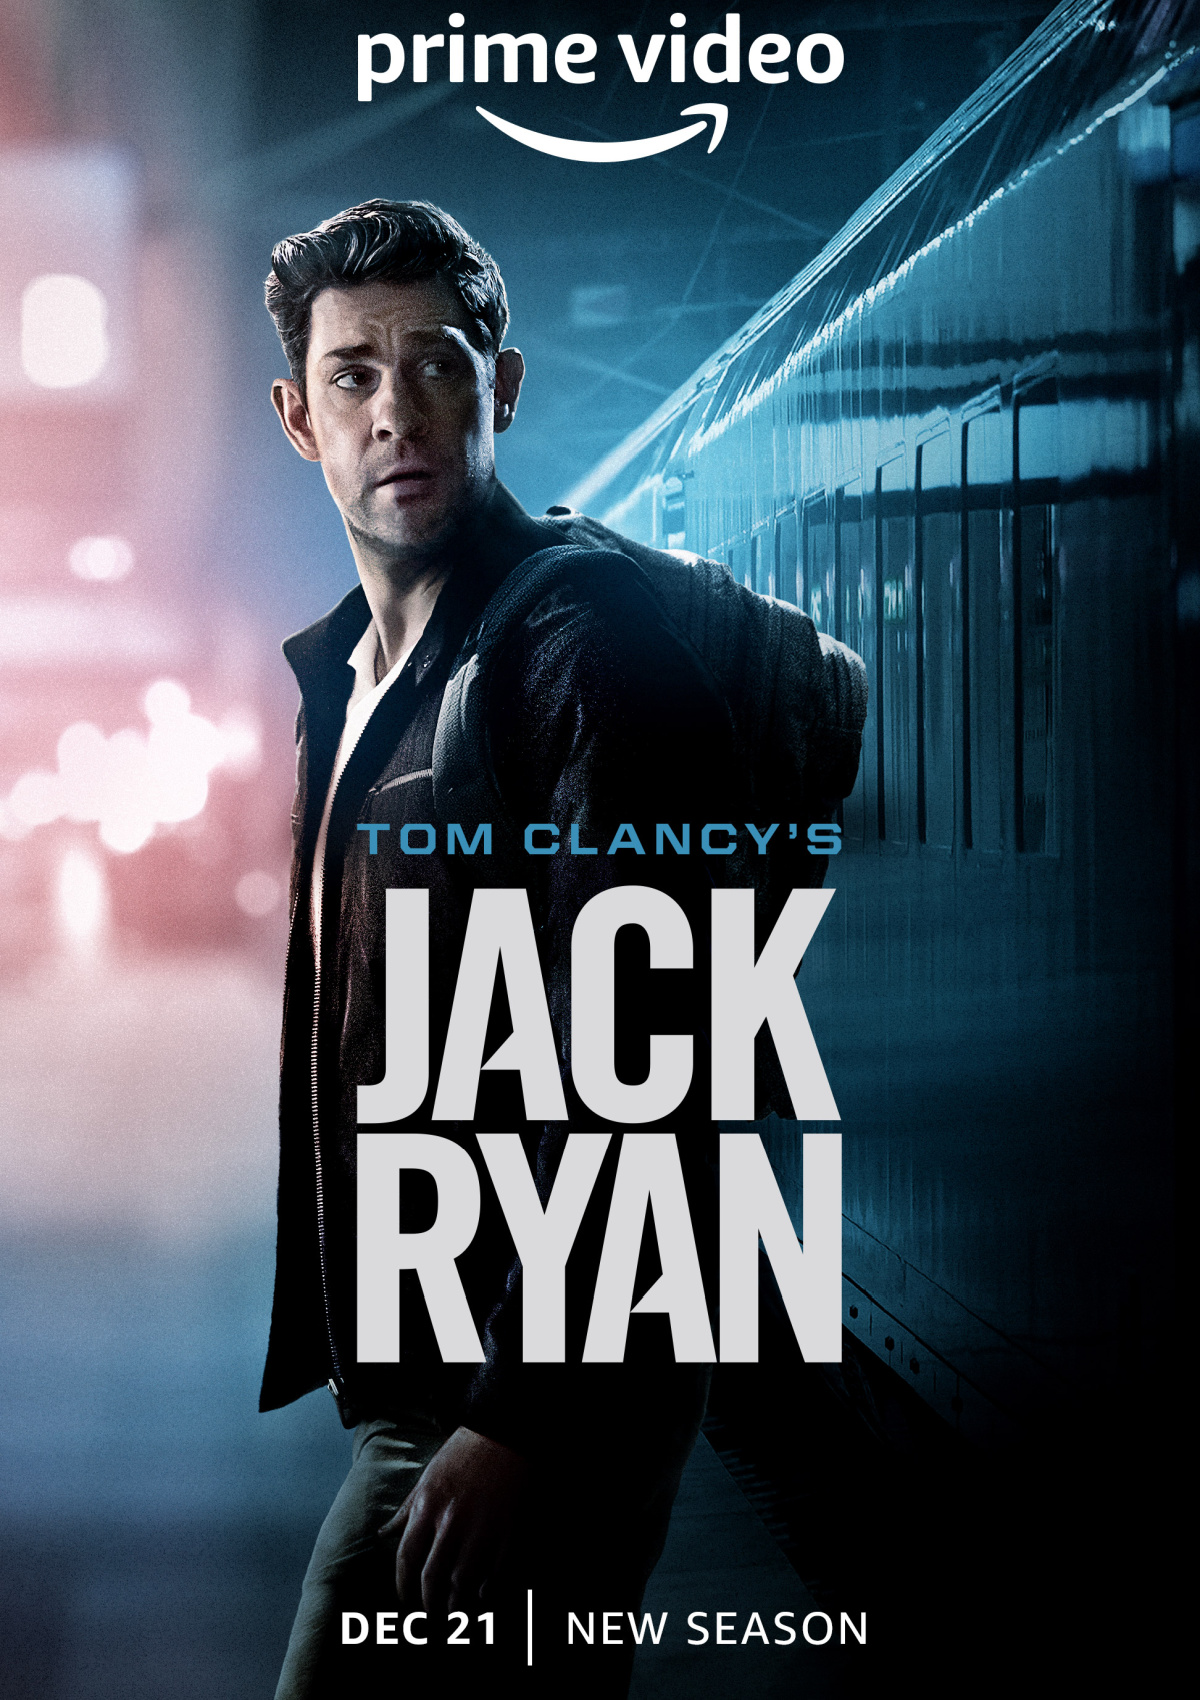 ‘Tom Clancy’s Jack Ryan’ will hit Prime Video on December 21st with an eight-episode Season 3.